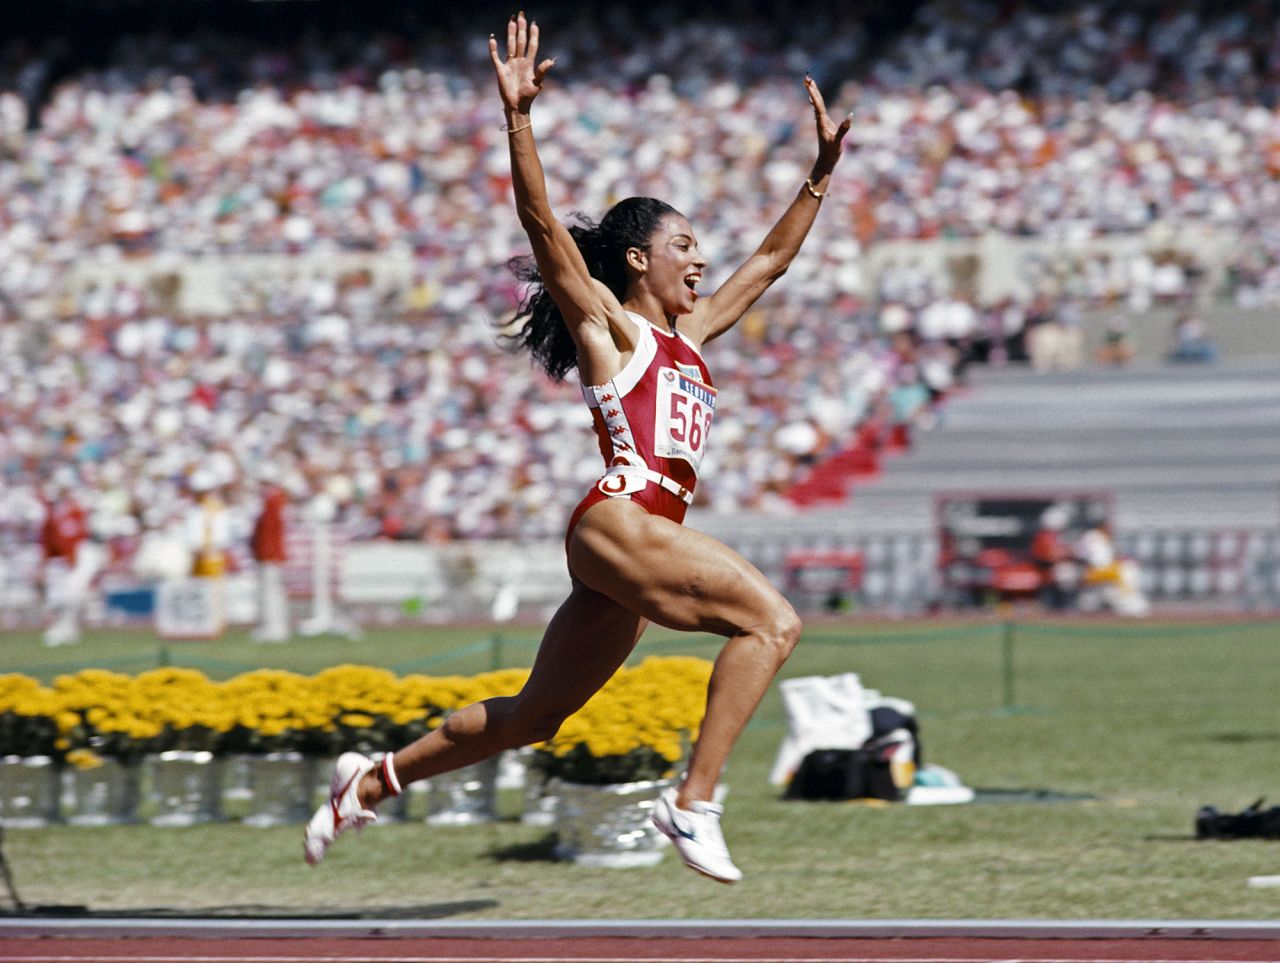 American sprinter Florence Griffith Joyner, aka "Flo-Jo," dominated the 100 and 200 meters at the 1988 Summer Games. She set a world record in the 200 (21.34 seconds) that still stands today. Her Olympic record in the 100 meters (10.62 seconds) was just off the world record she set a couple months earlier. That record (10.49 seconds) still stands today as well.